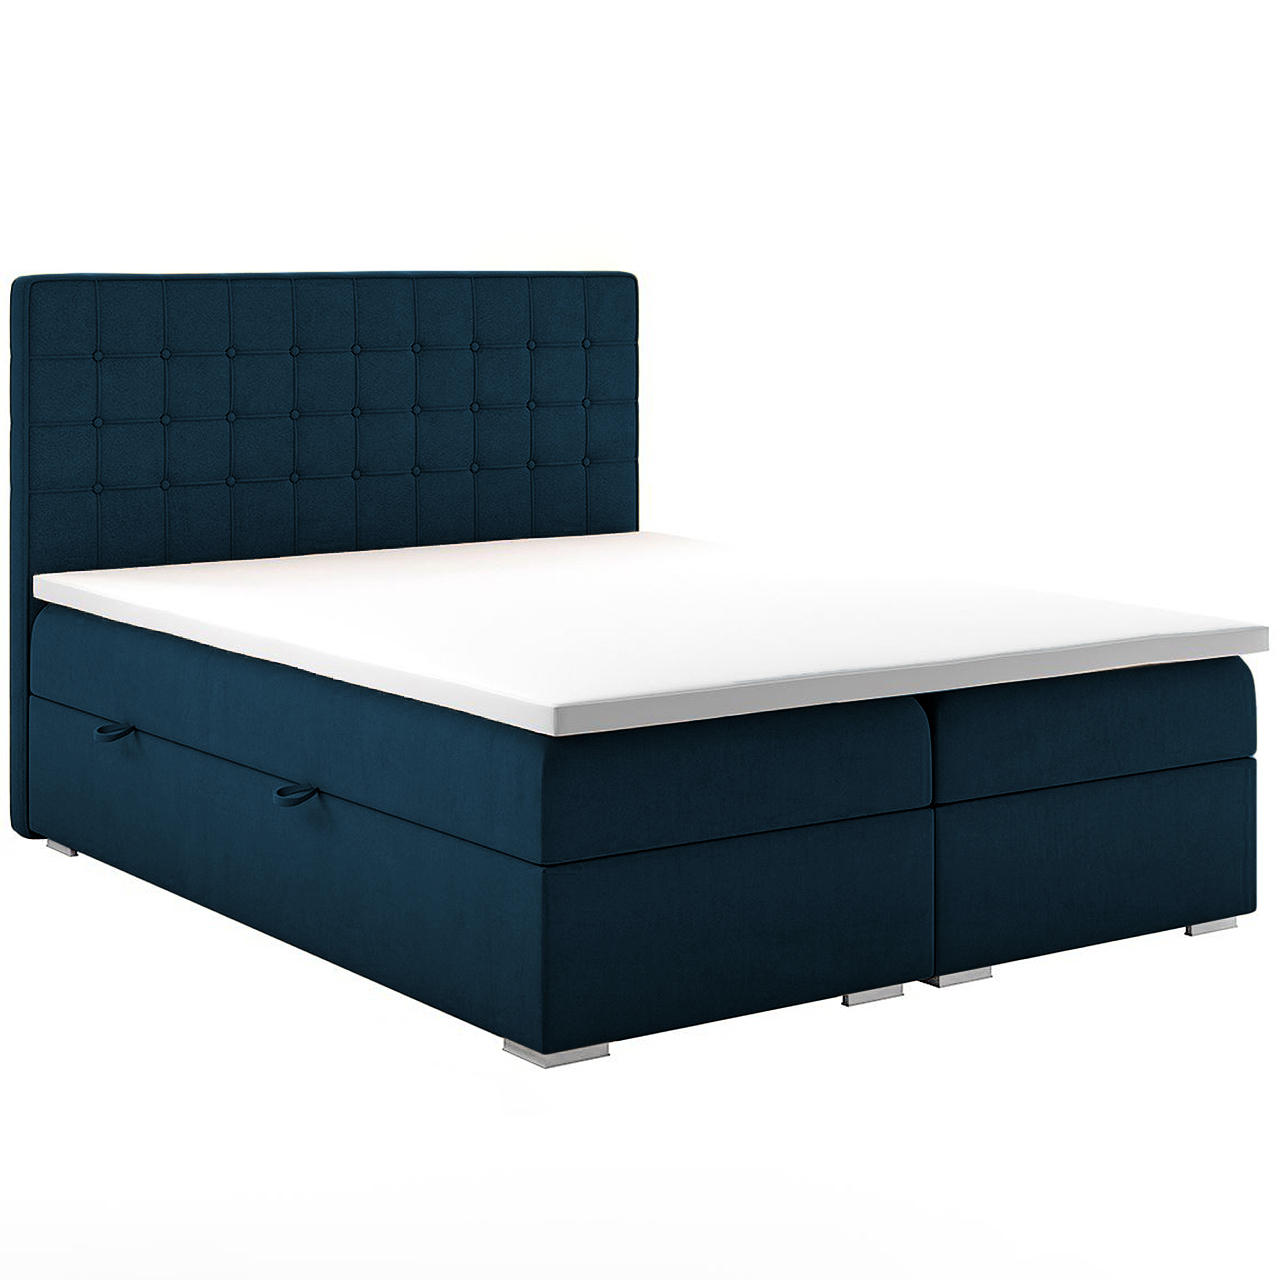 Upholstered bed CARLOS 180x200 monolith 76